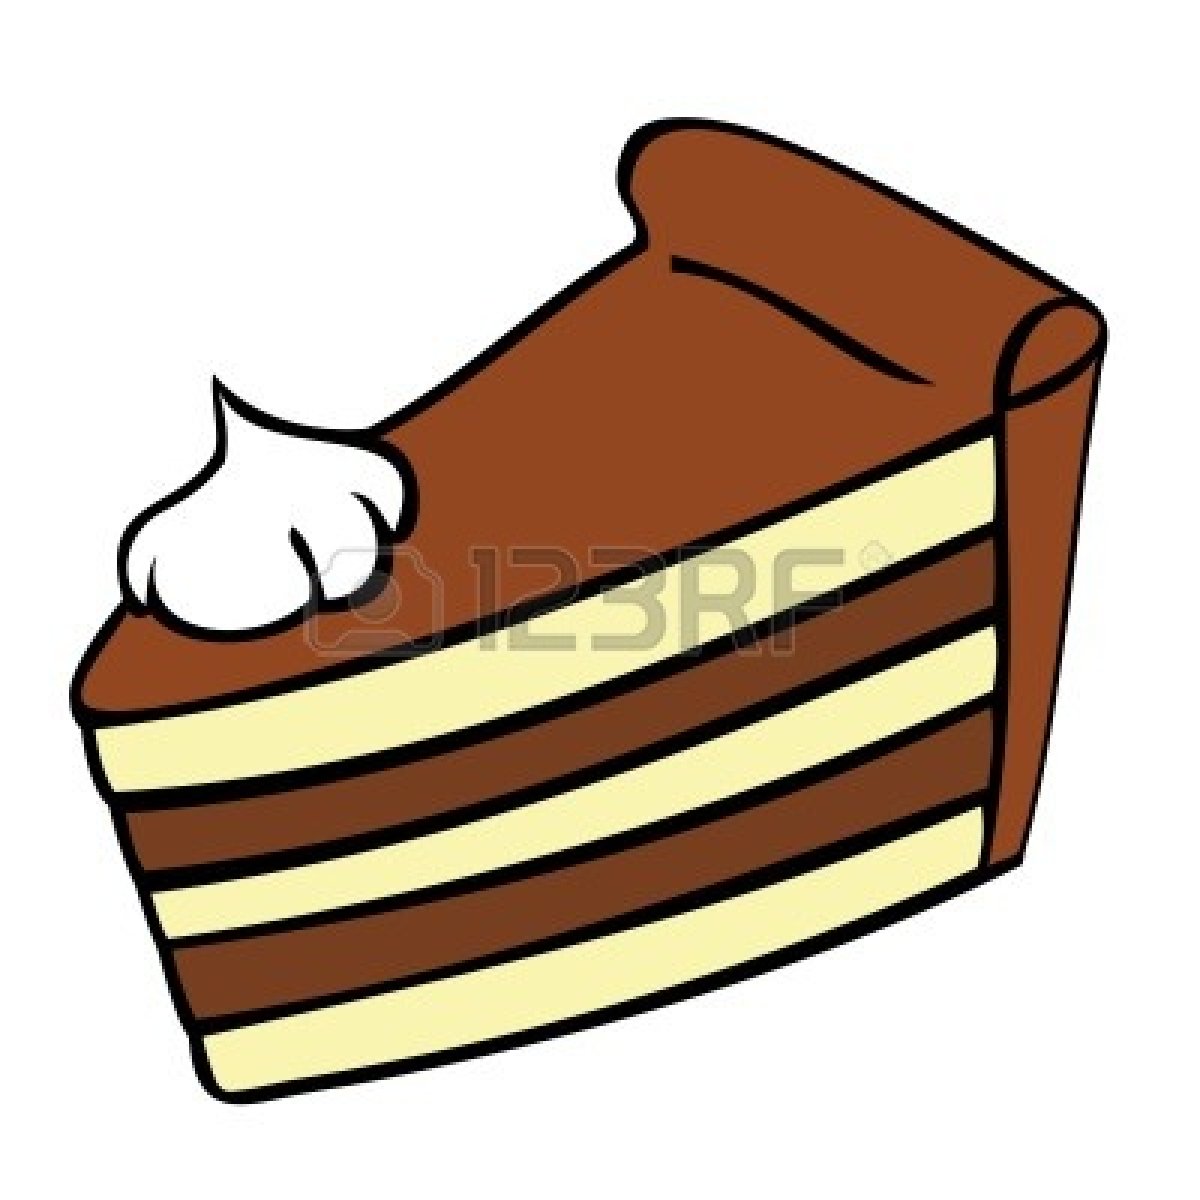 Slice Of Cake Clipart Black And White   Clipart Panda   Free Clipart